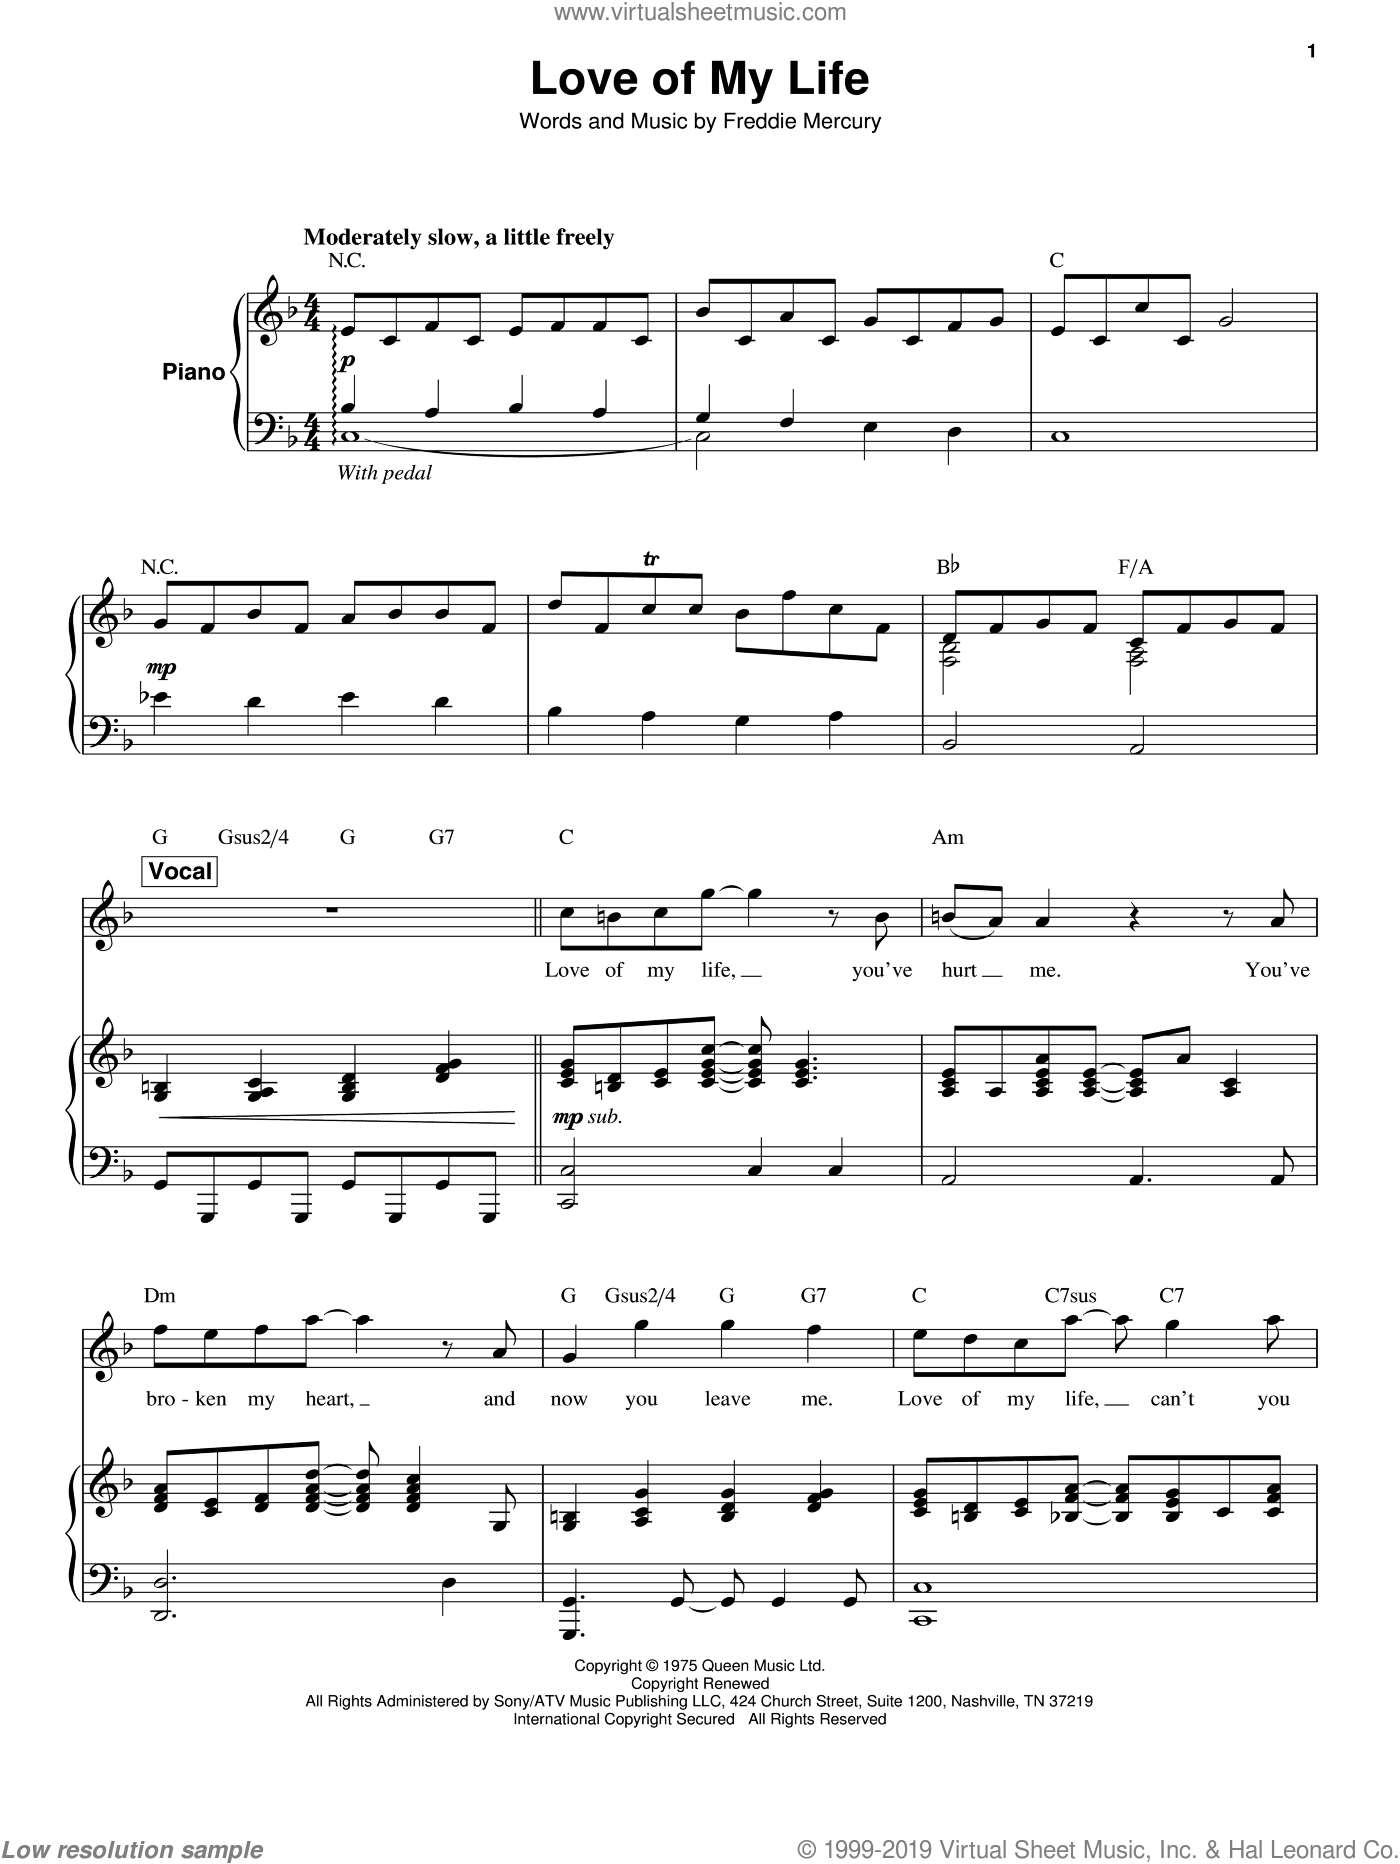 Queen - My Life sheet music for keyboard or piano (PDF)